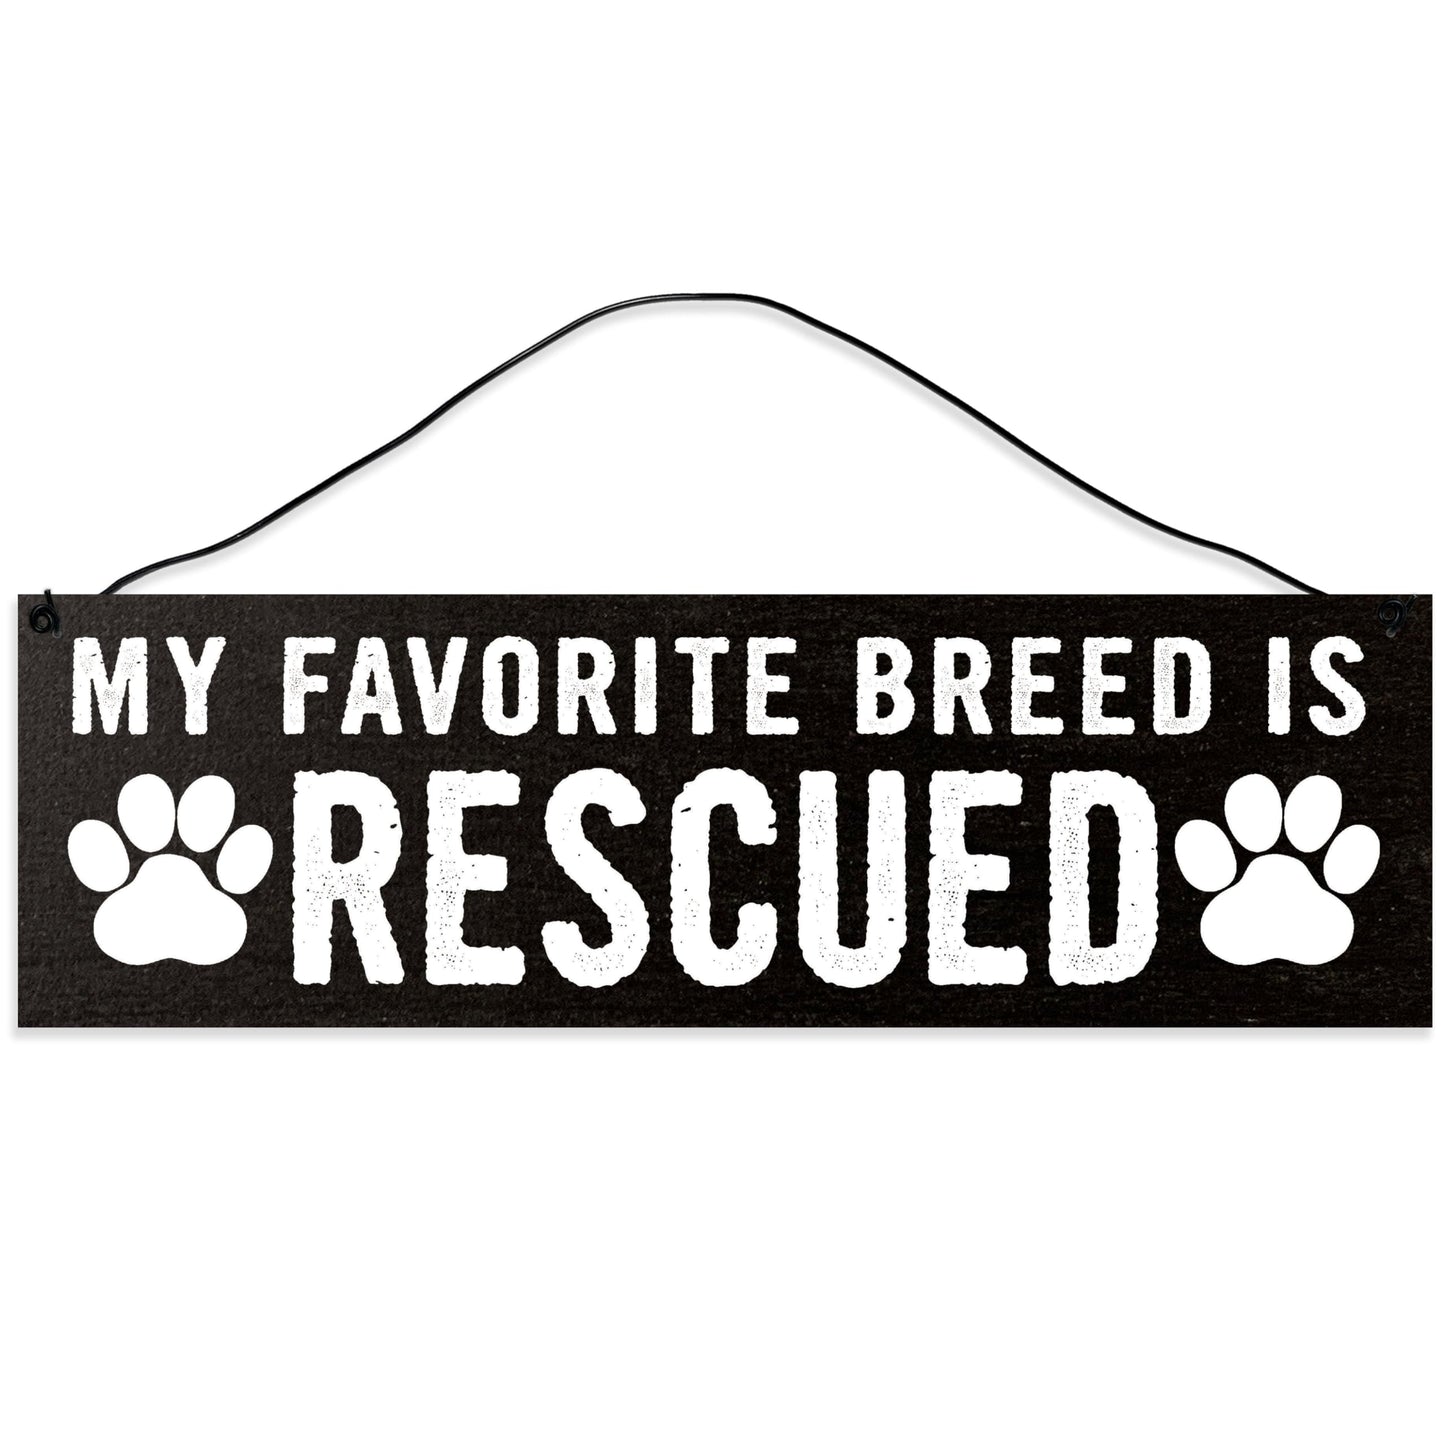 Rescued | Handmade | Wood Sign | Wire Hanger/Stand | UV Printed | Solid Maple